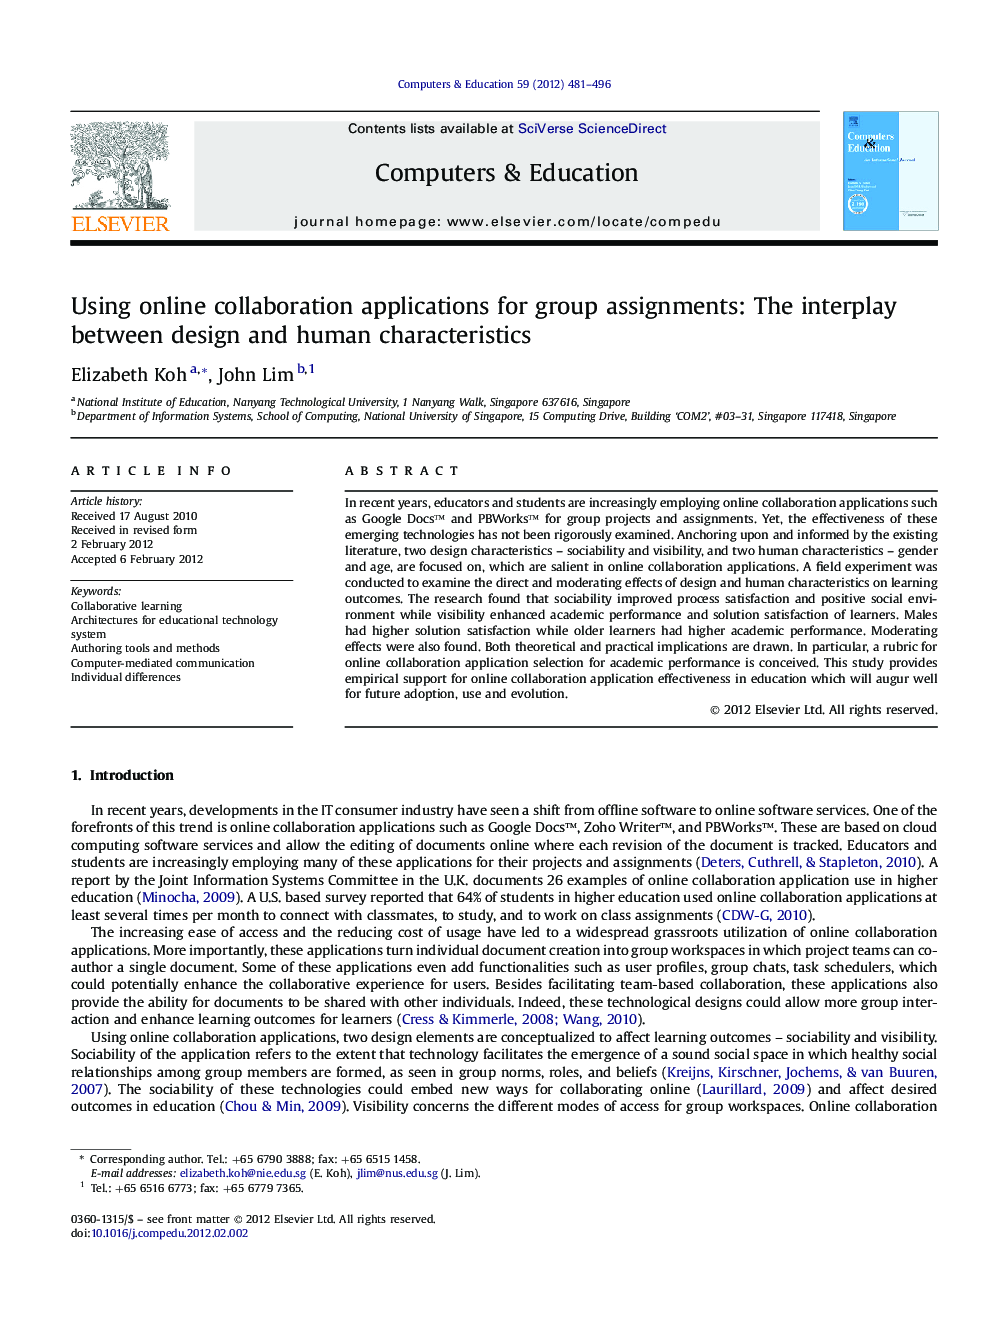 Using online collaboration applications for group assignments: The interplay between design and human characteristics